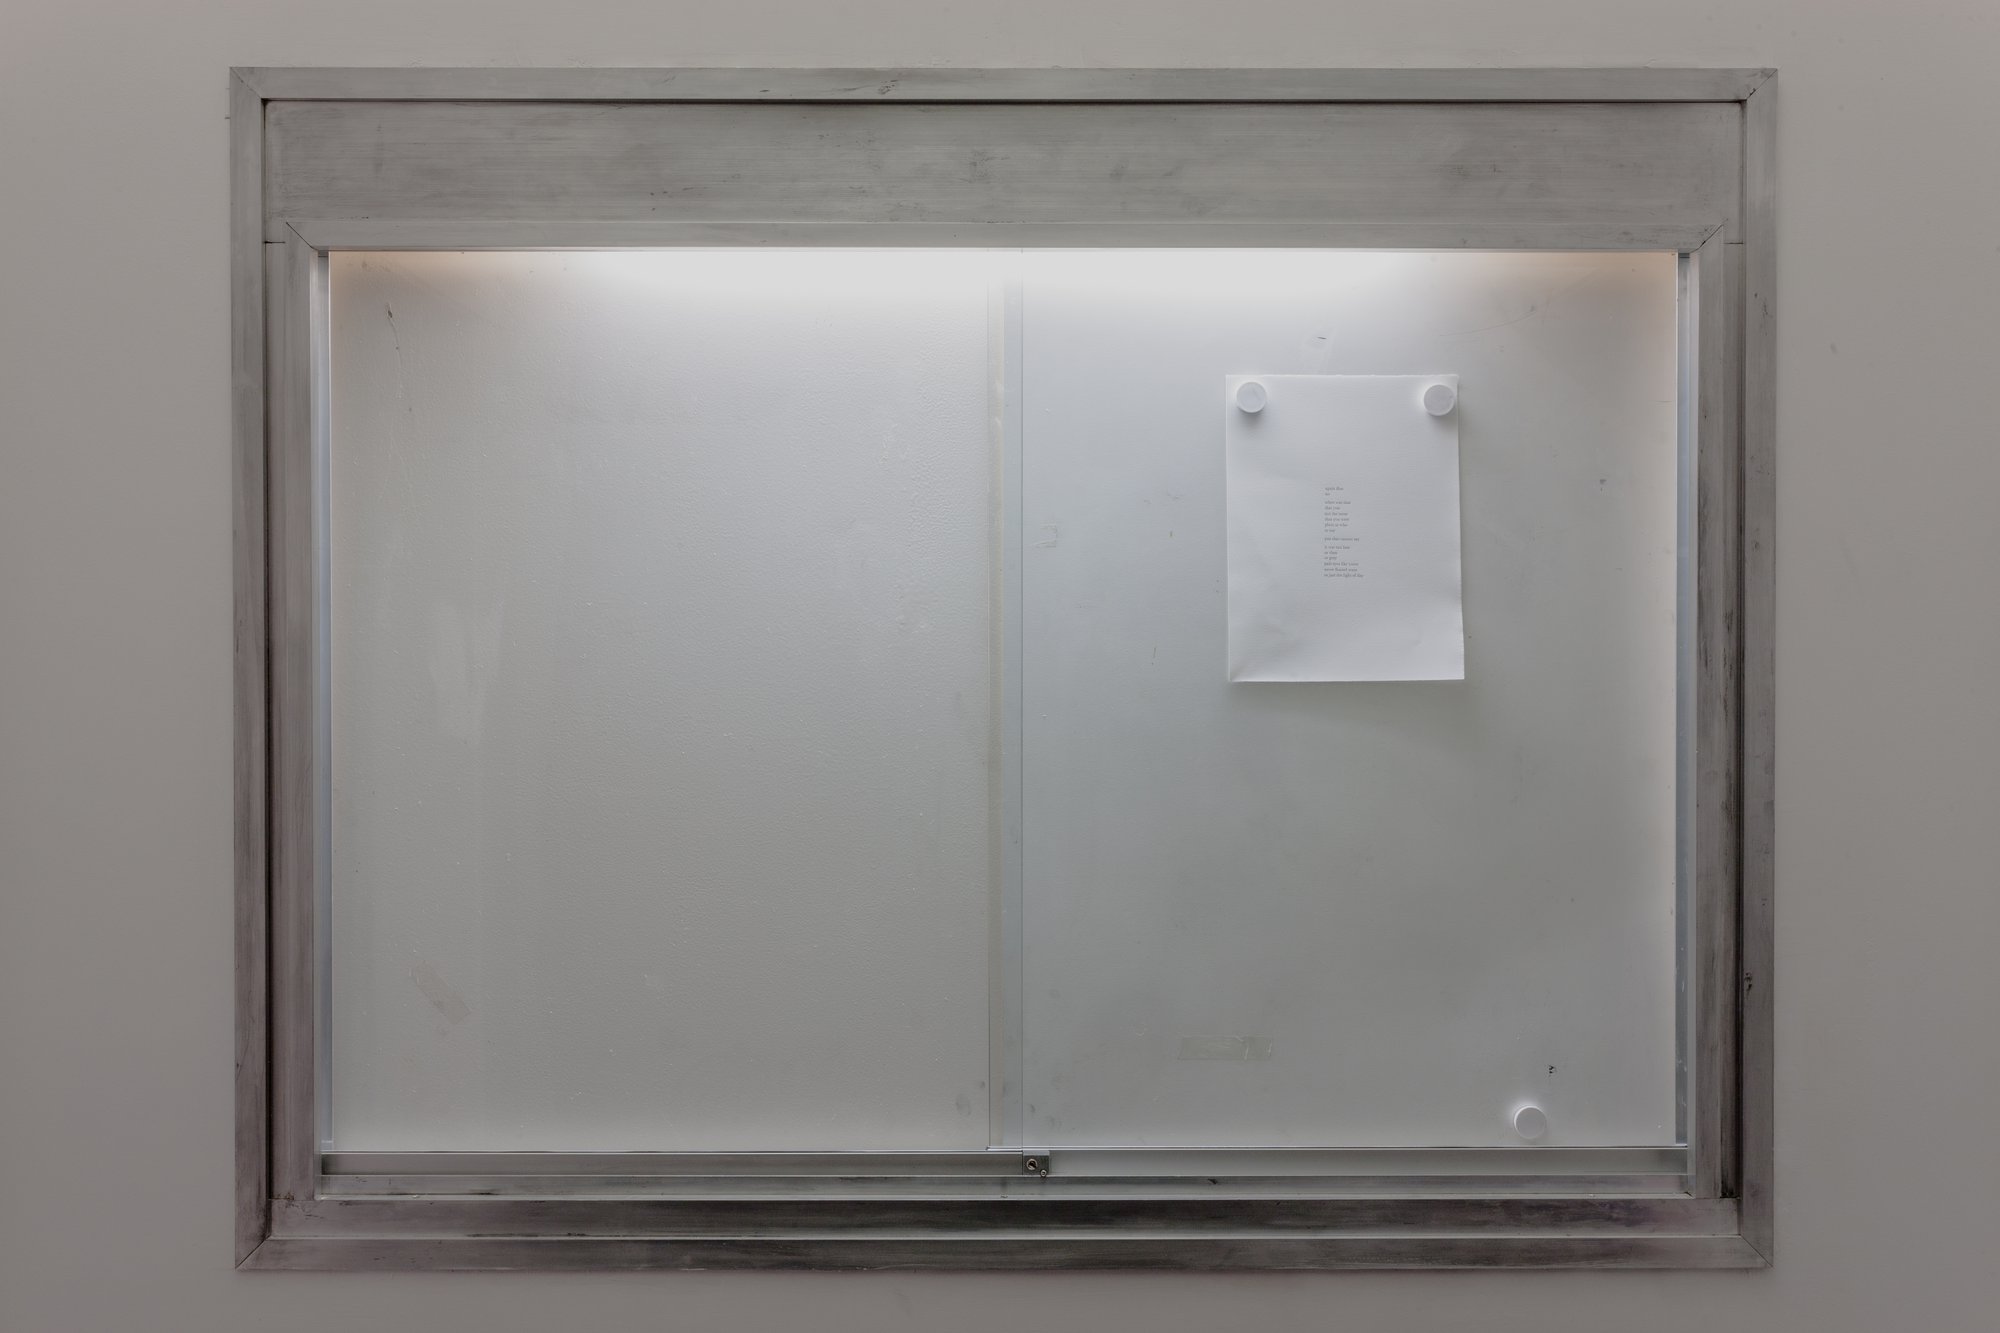 Duncan Campbell, Untitled, found metal vitrine and poem, 123.2 x 158.3 x 12 cm, 2015